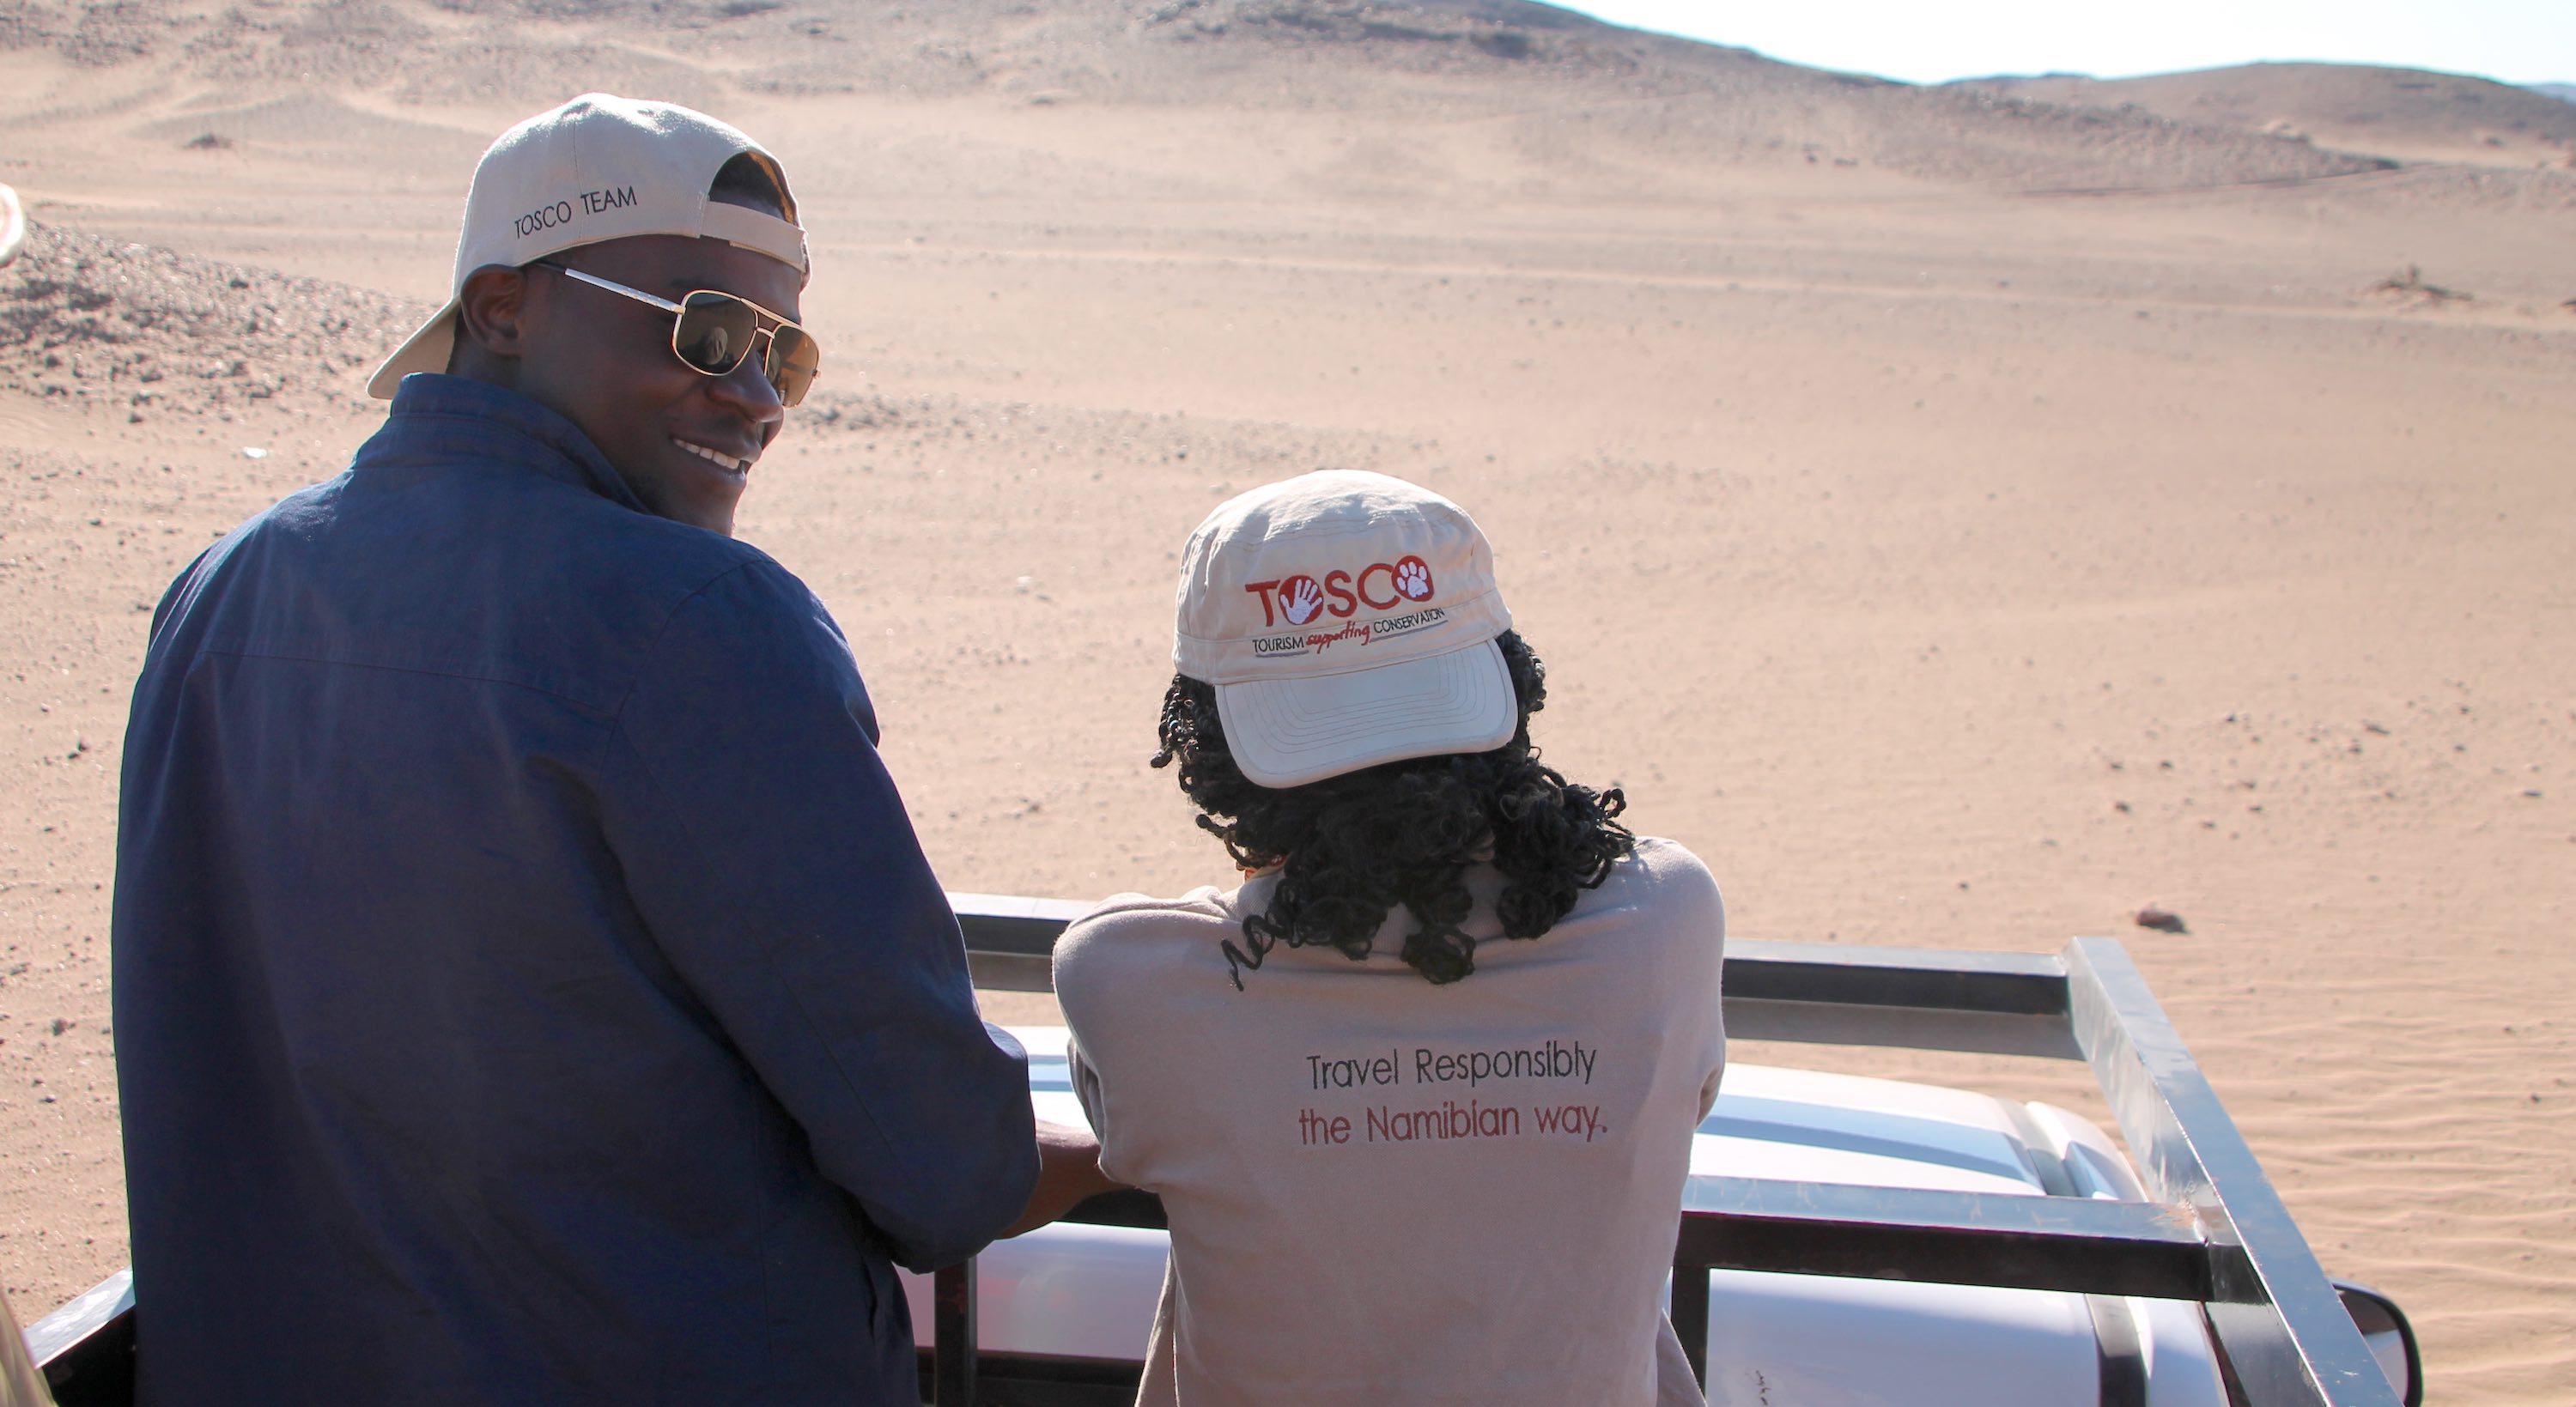 A man and a woman wearing TOSCO branded clothing riding in the back of a bakkie in the desert.